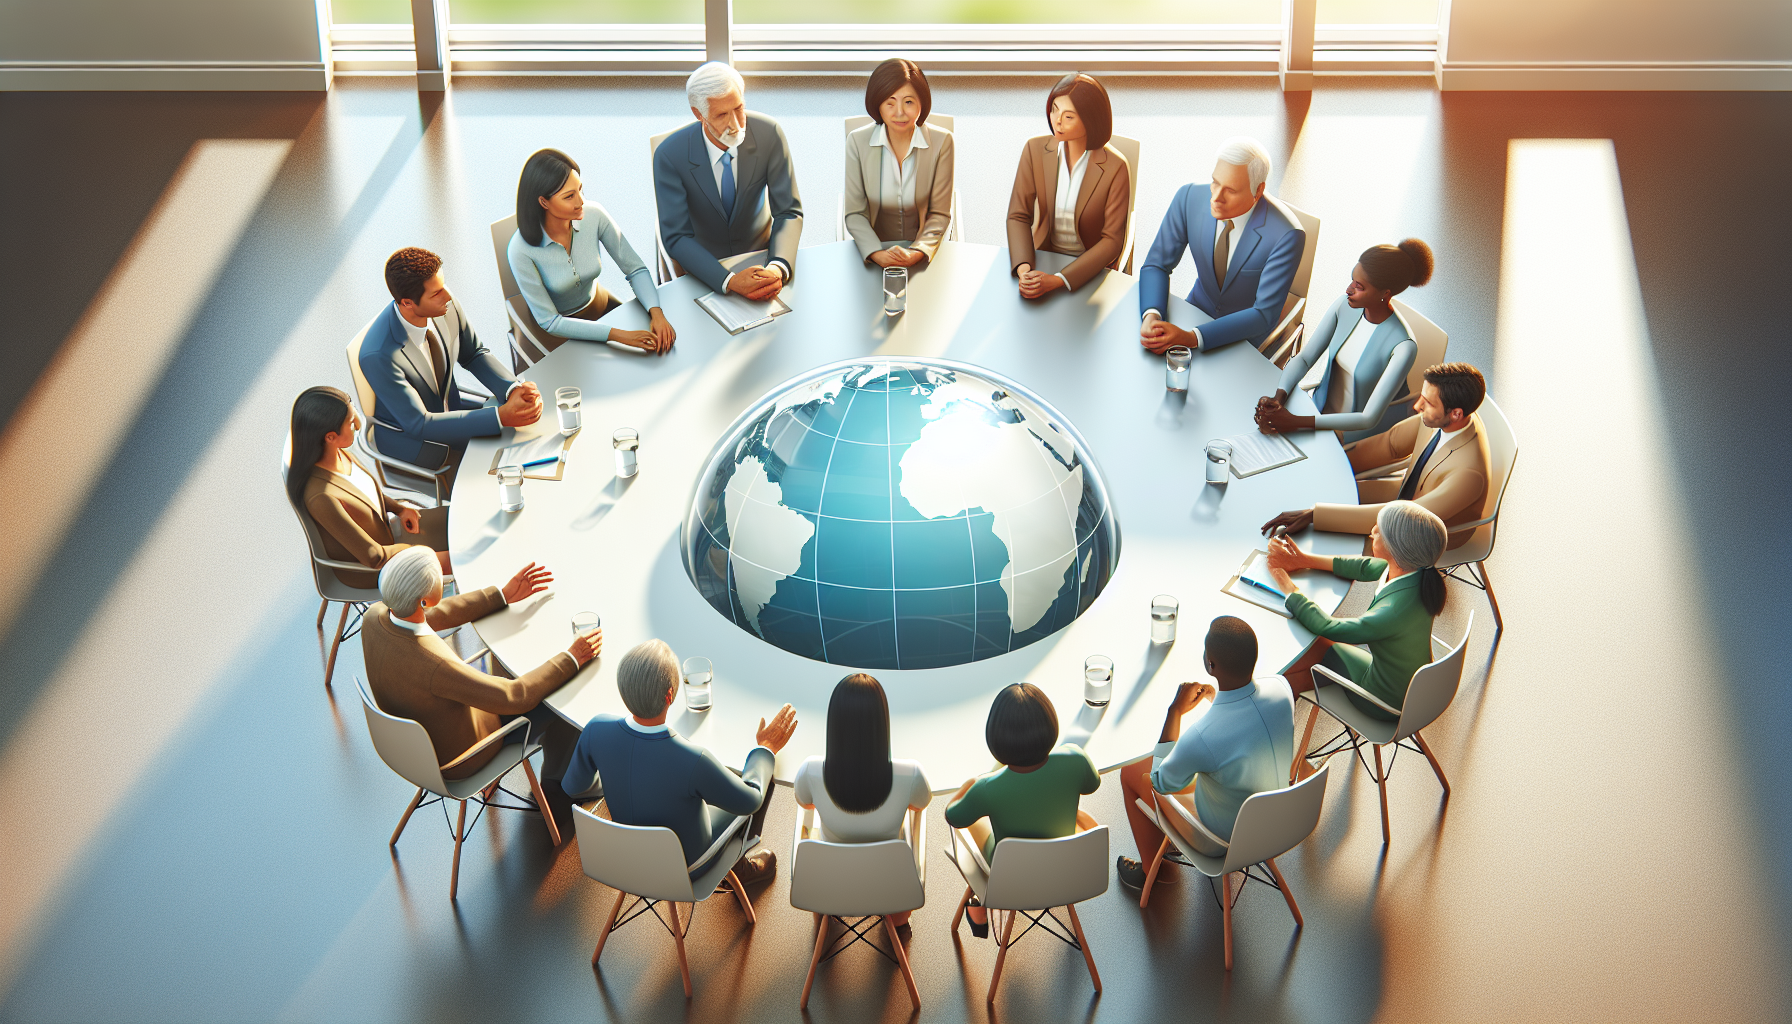 Illustration of a diverse group of stakeholders representing expanded fiduciary duty